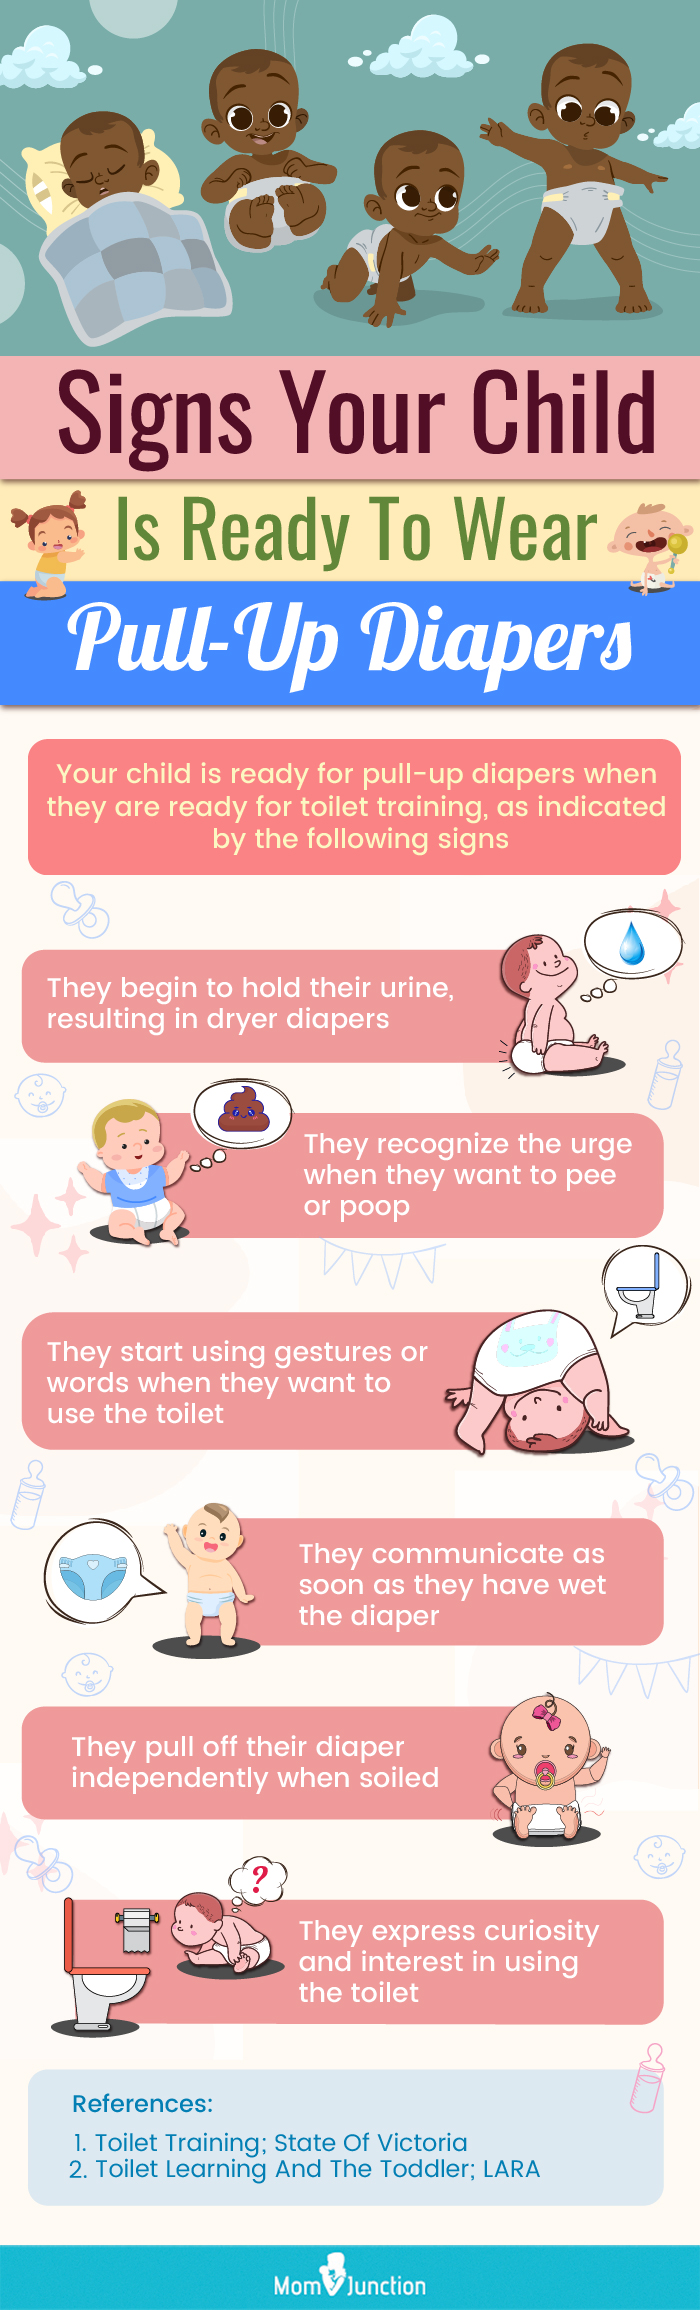 Signs Your Child Is Ready To Wear Pull-Up Diapers (infographic)